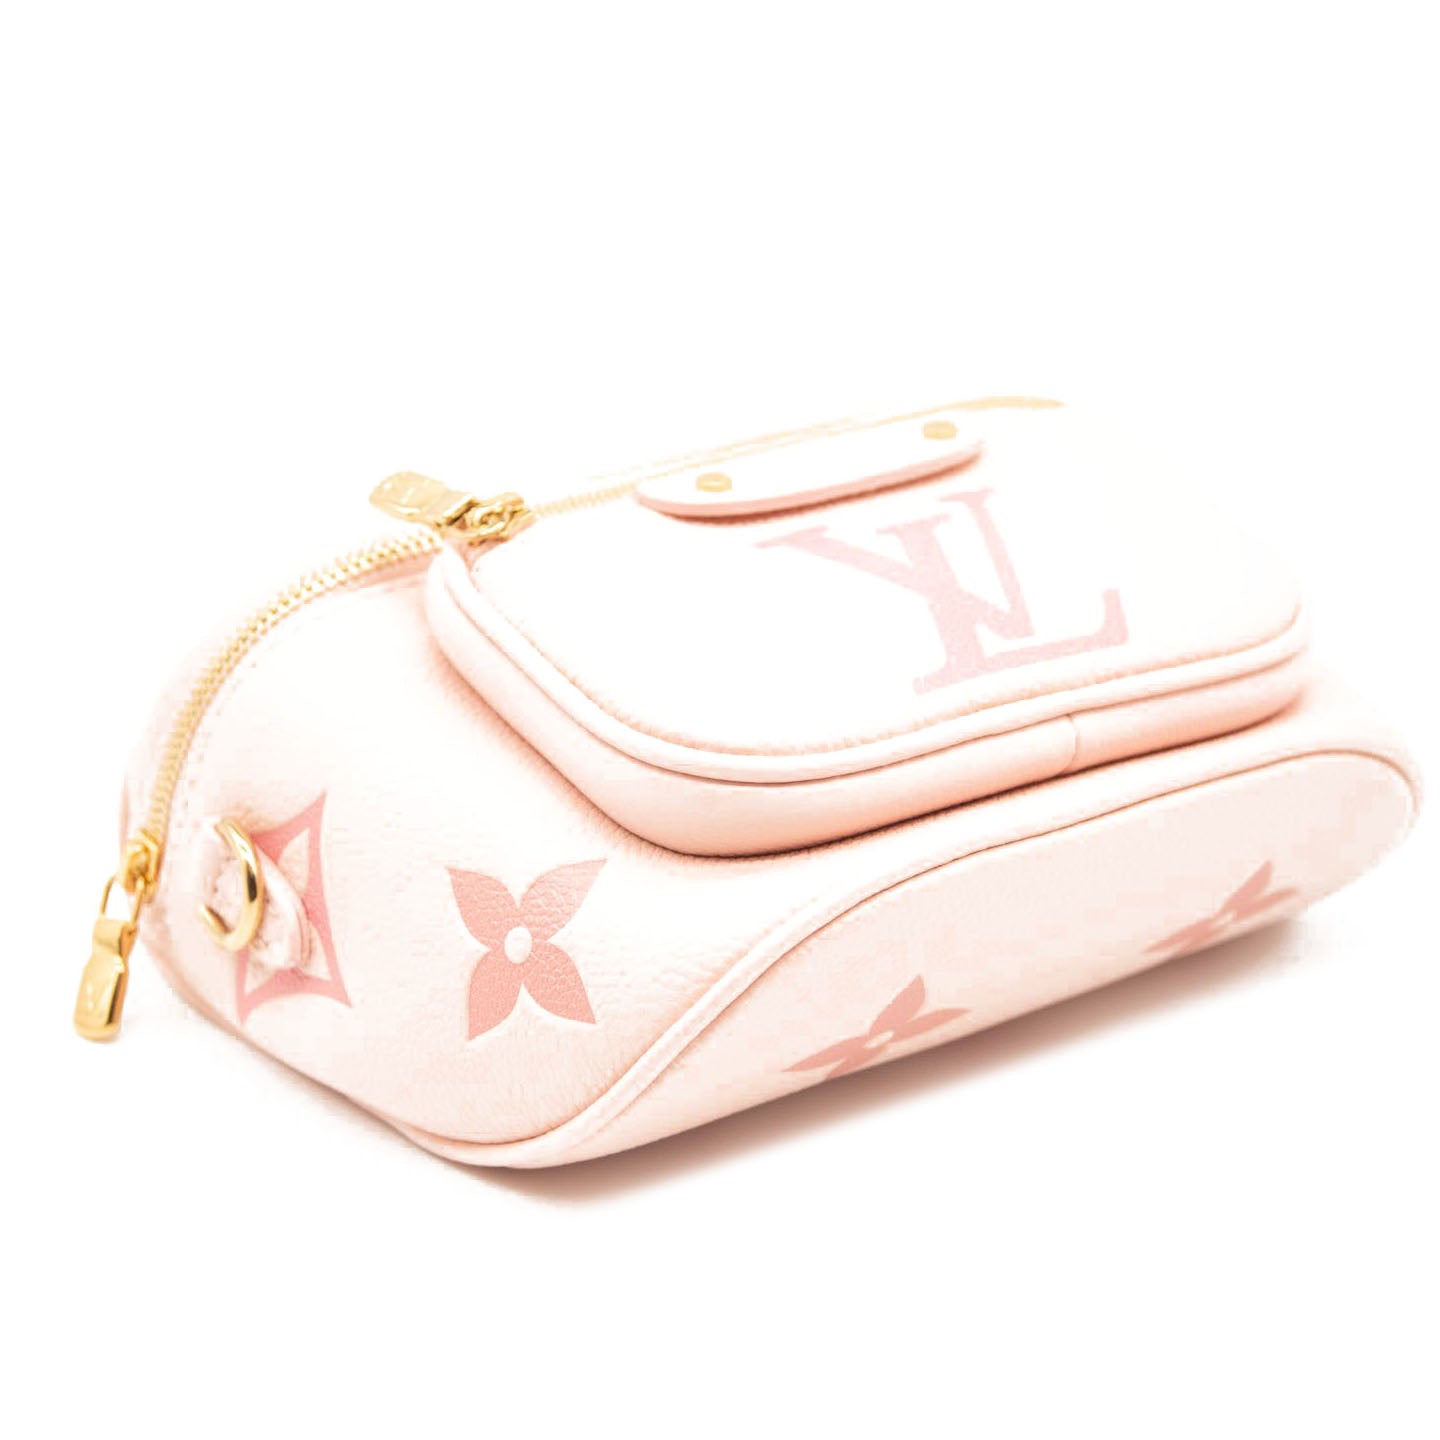 Authentic Brand New Louis Vuitton By The Pool Mini Pochette in Pink